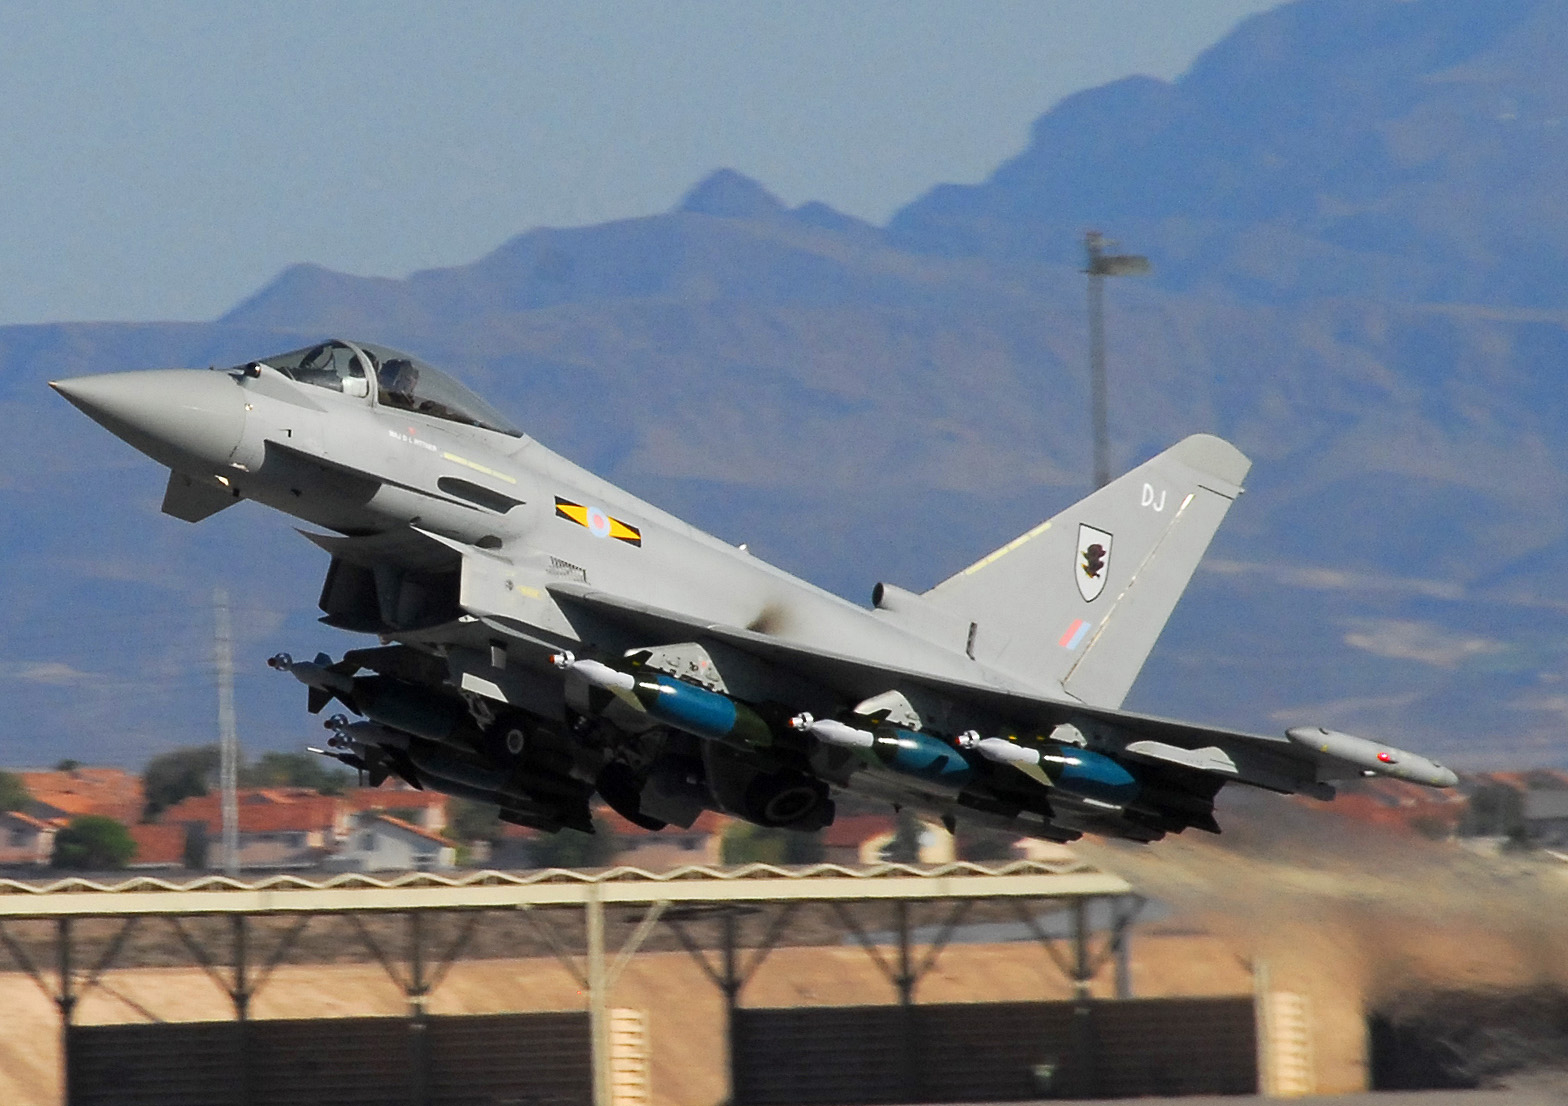 All The Military Gear The UK’s Buying On Its Defence Spending Spree